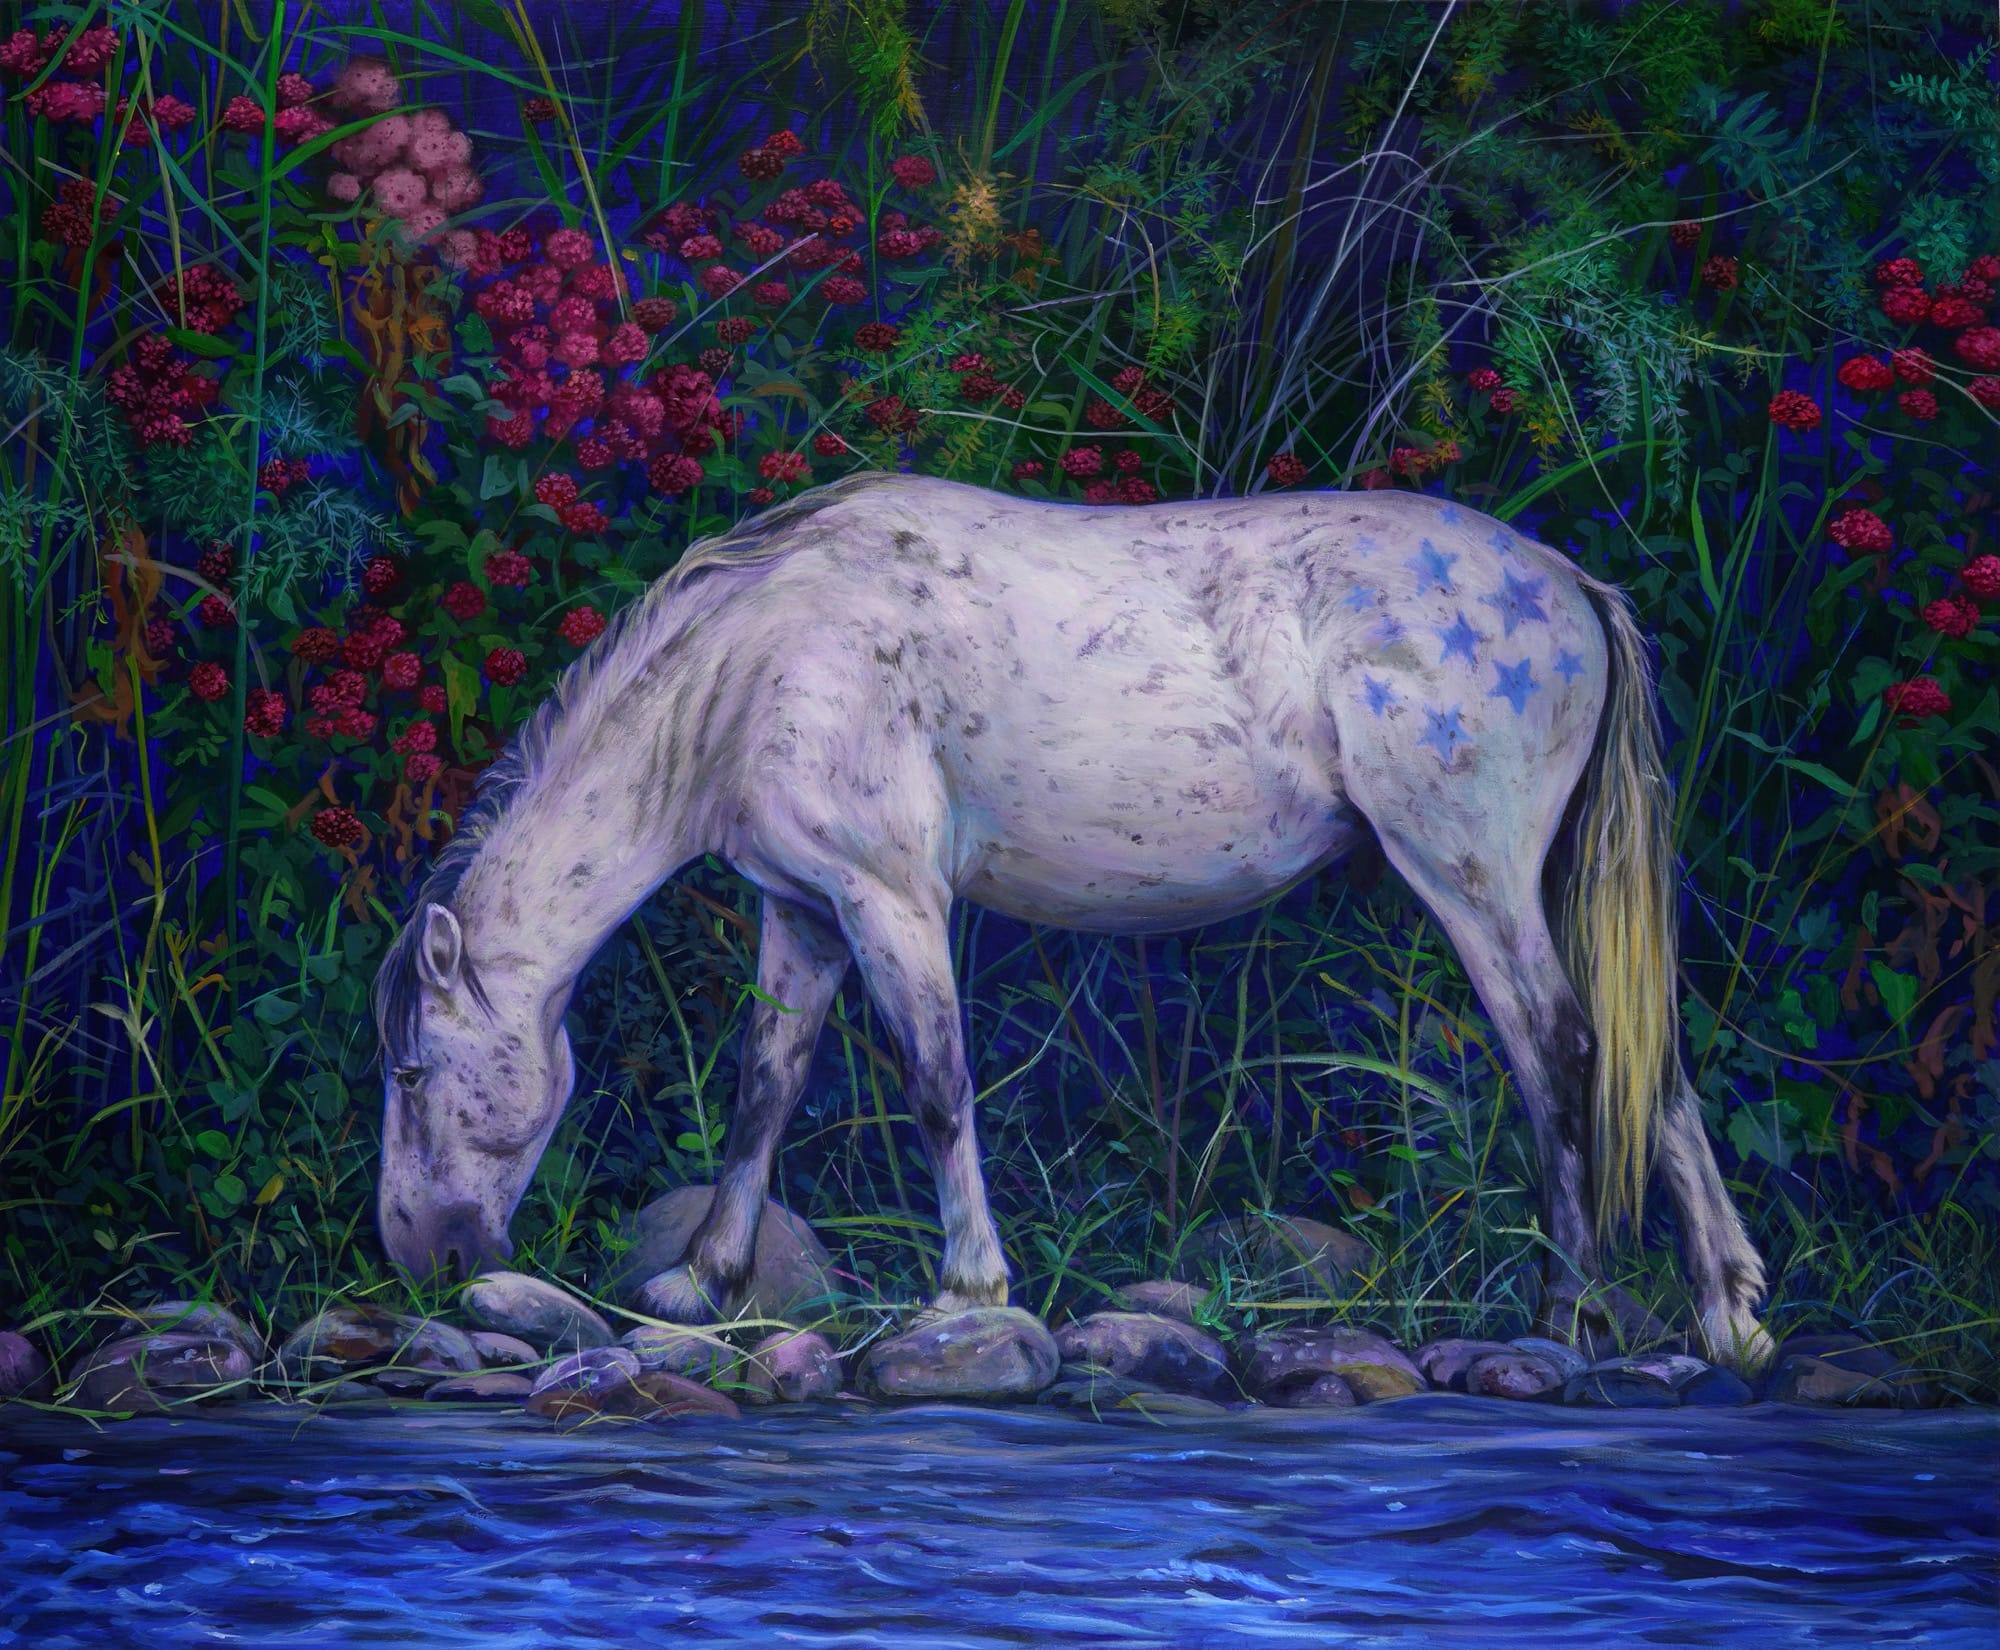 an acrylic painting of a white speckled horse eating on the shore of some water, with dense foliage behind it